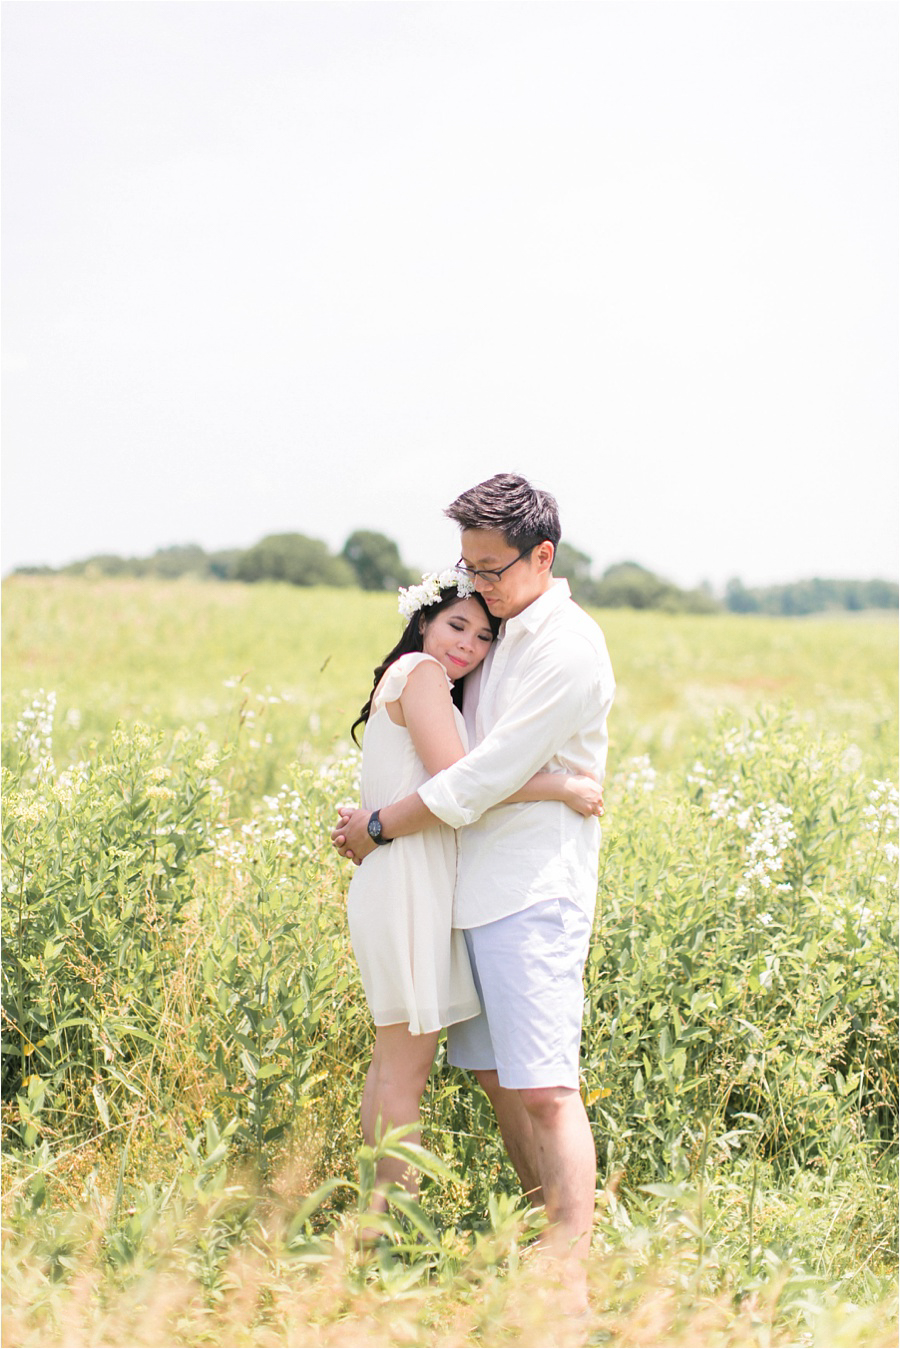 Longwood Gardens Engagement Photos - Amy Rizzuto Photography-14